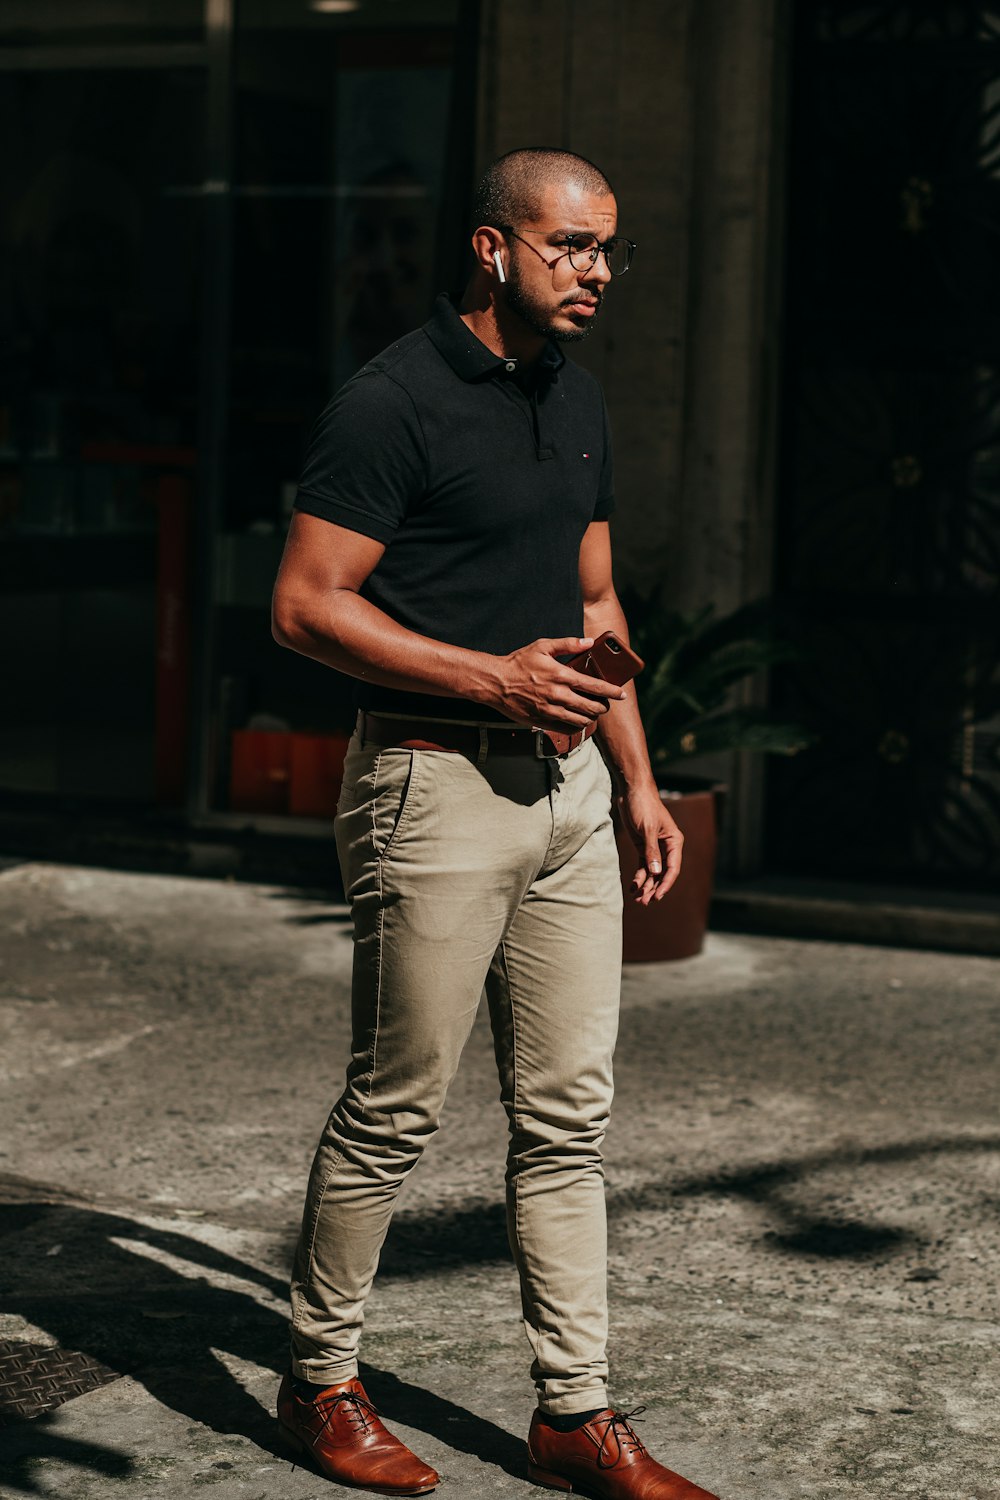 Man in black polo shirt and blue denim jeans standing on sidewalk during  daytime photo – Free Rio de janeiro Image on Unsplash